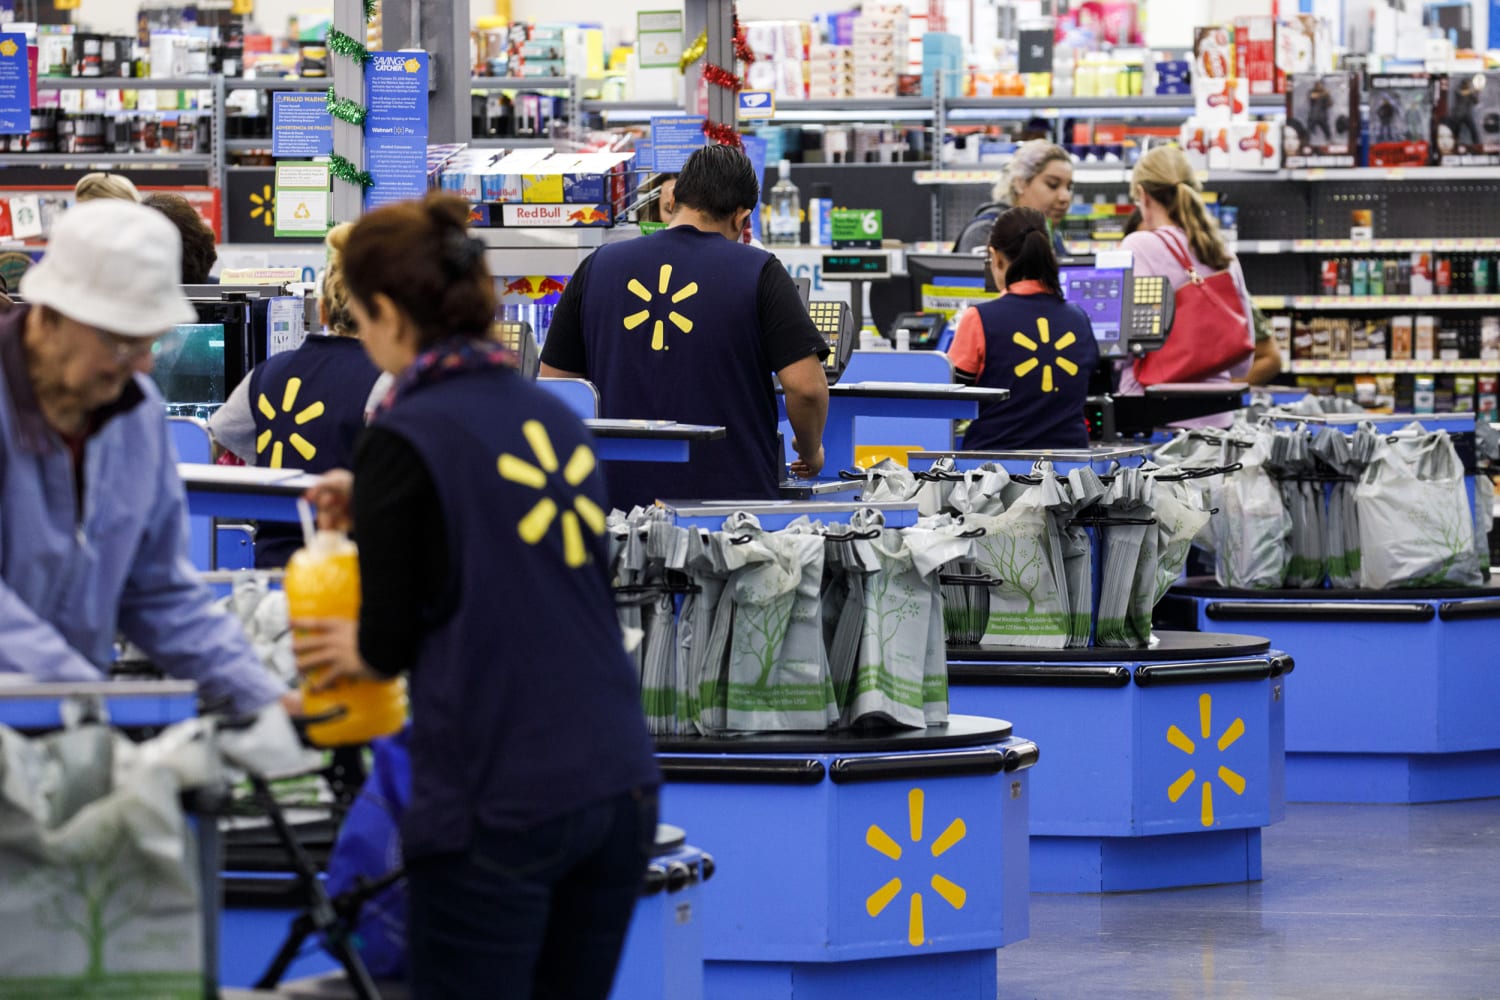 Walmart raises starting wages, handing out $1,000 bonuses - The